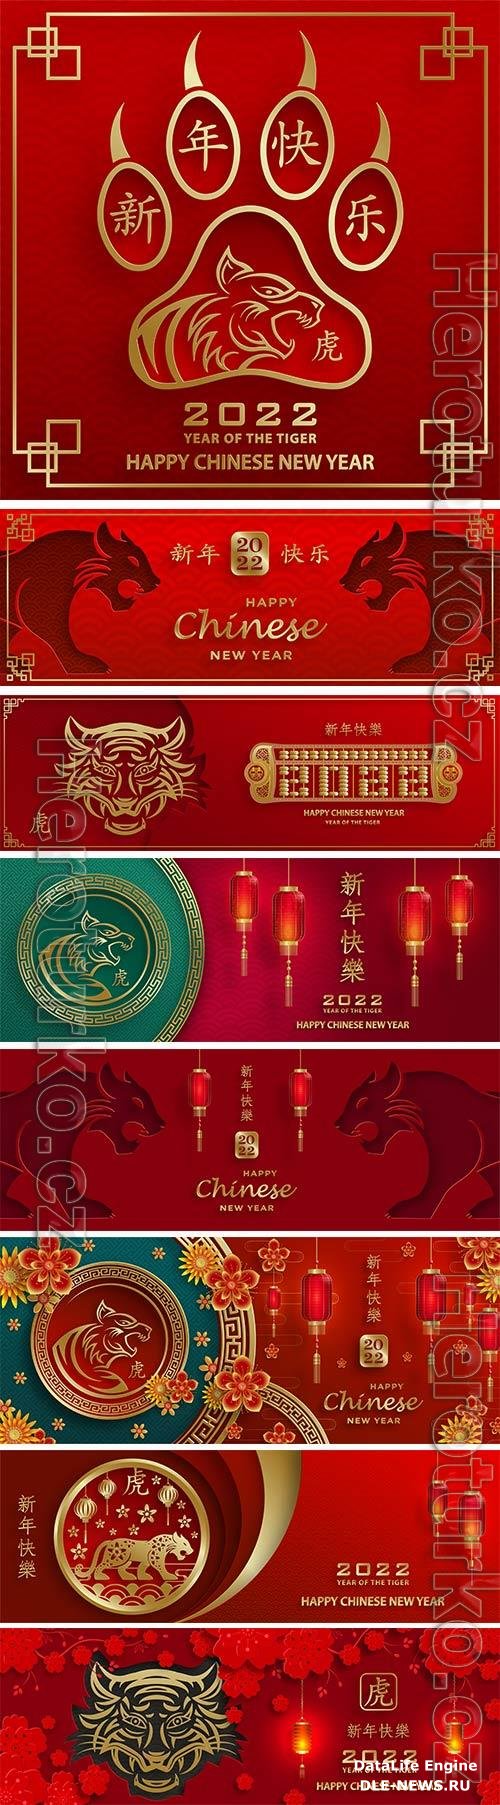 Happy chinese new year 2022 vector design